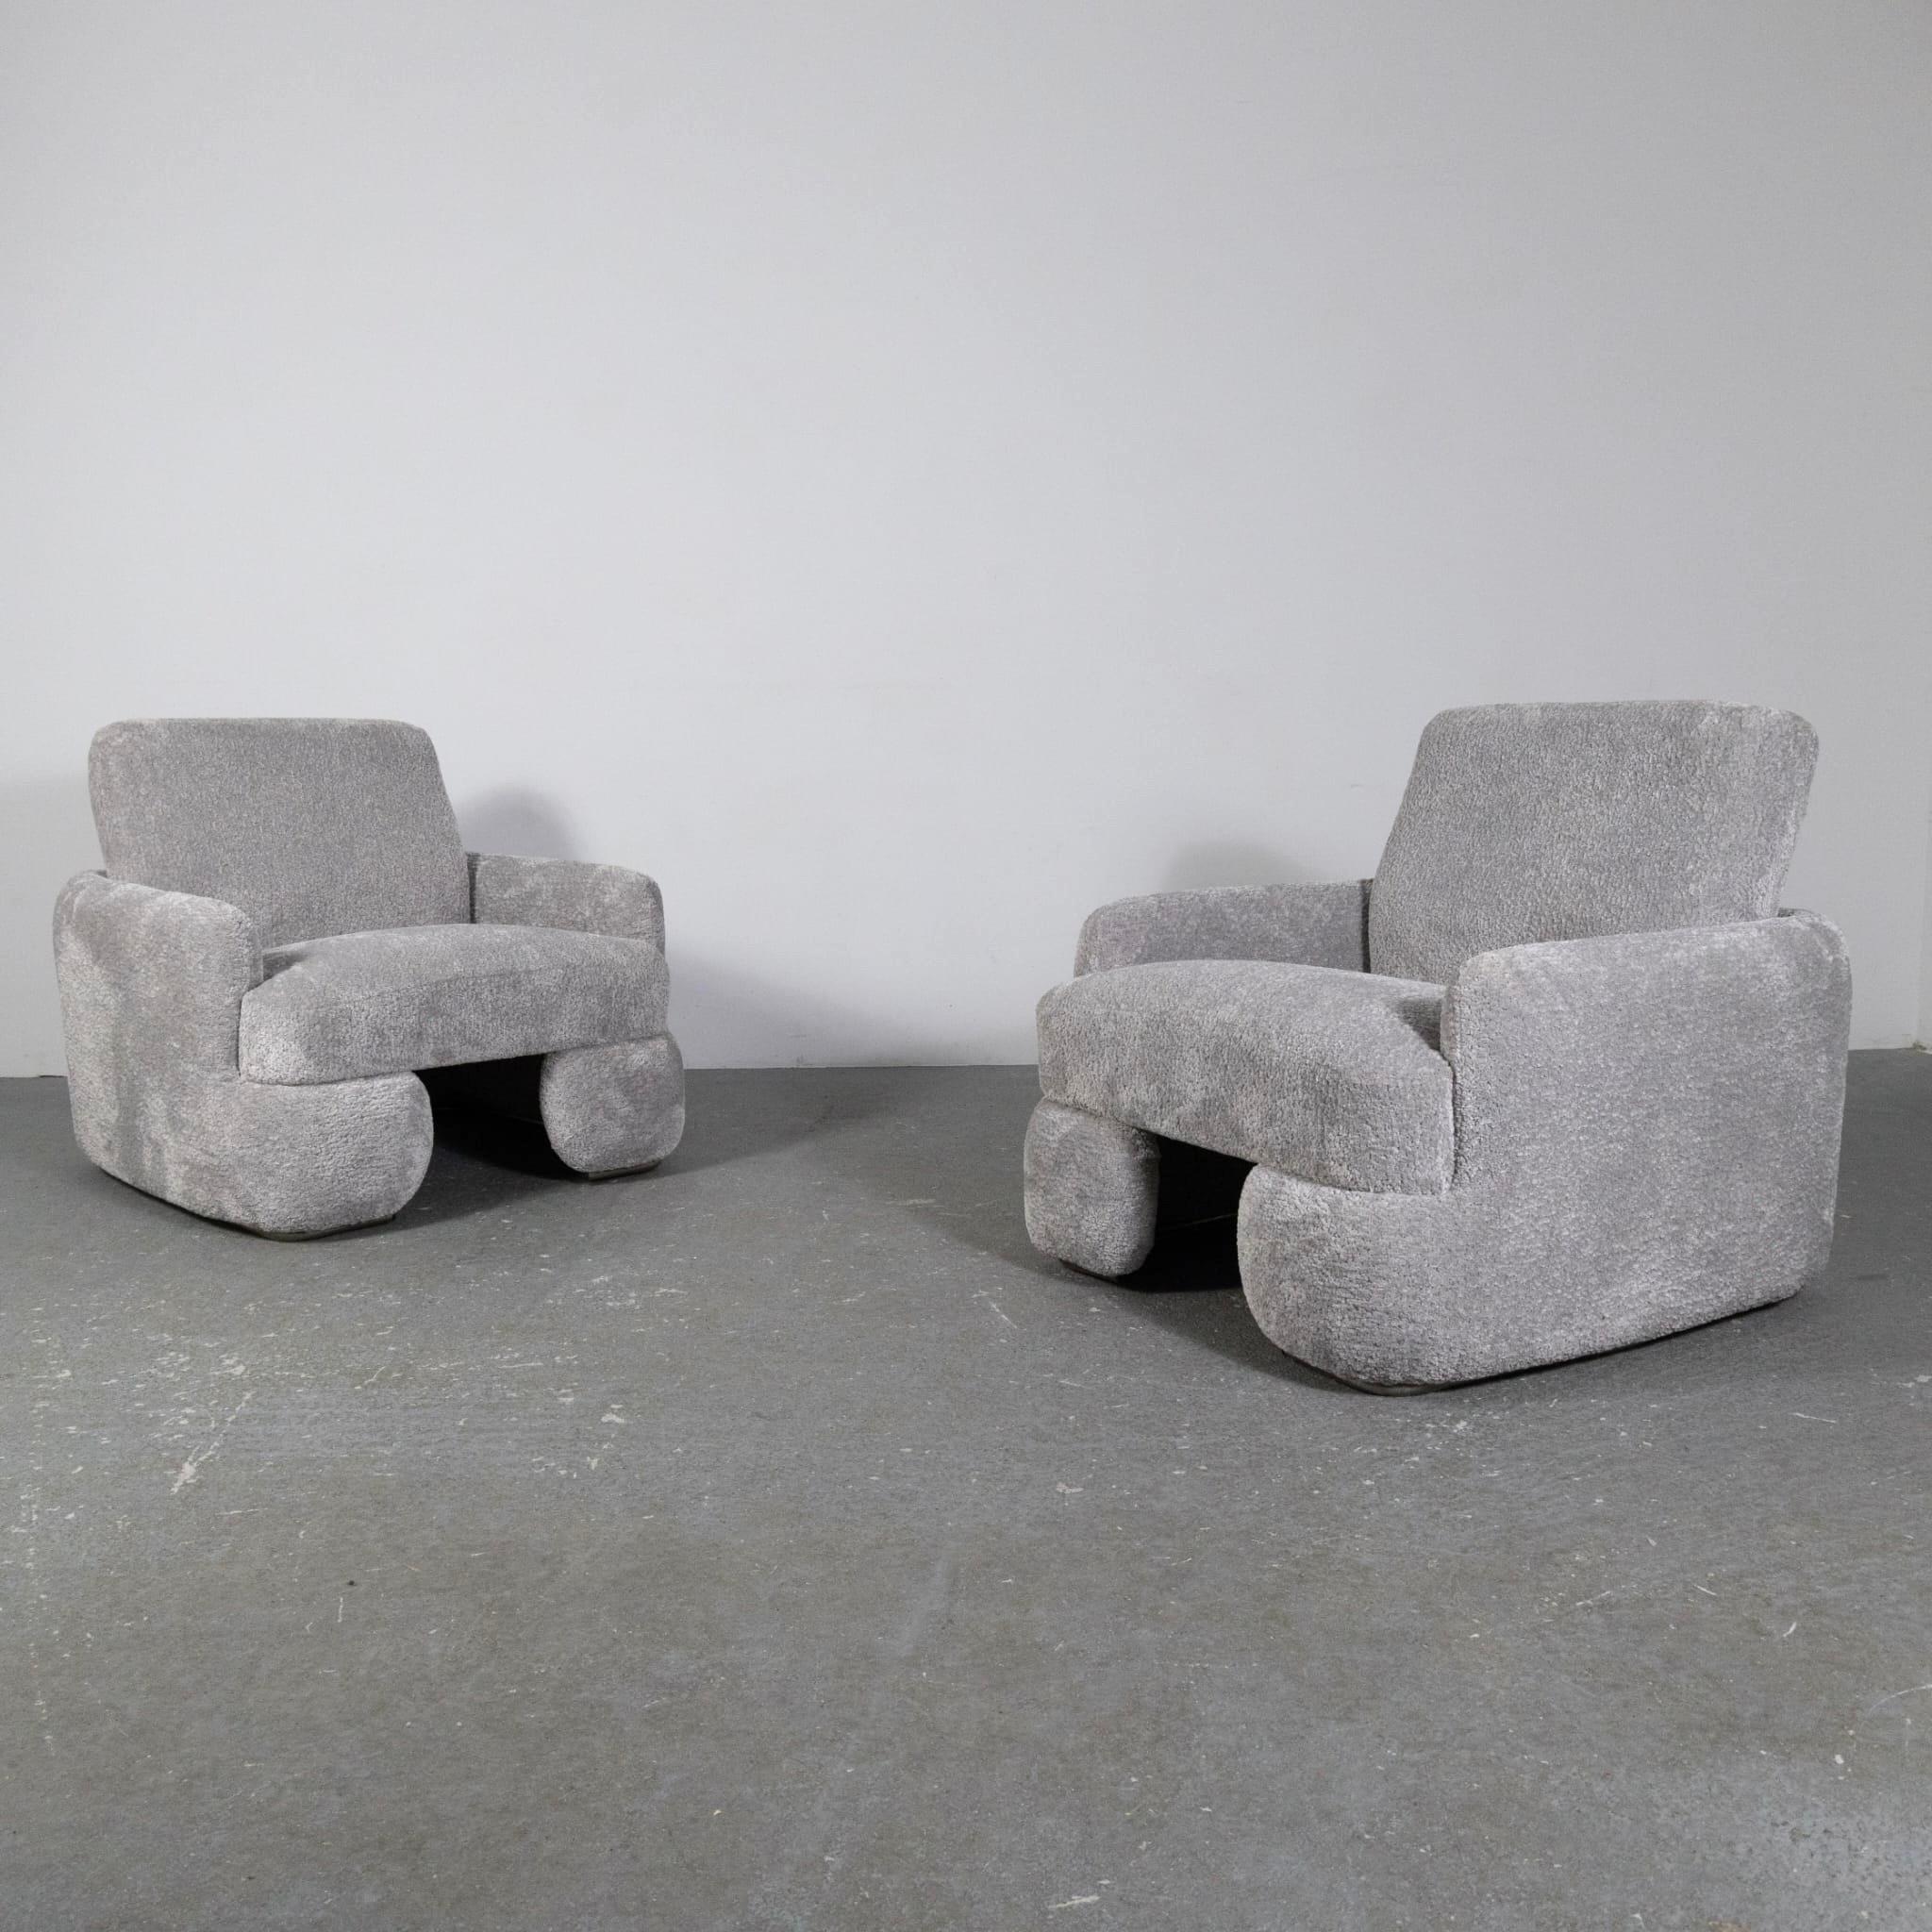 Mid-Century Modern space age Italian design pair of armchairs or lounge chairs attributed to the manufacture Tecnosalotto. New Upholstery reupholstered gray bouclé fabric. Famous design like Gio Ponti, Gianfranco Frattini, Cassina, Osvaldo Borsani,